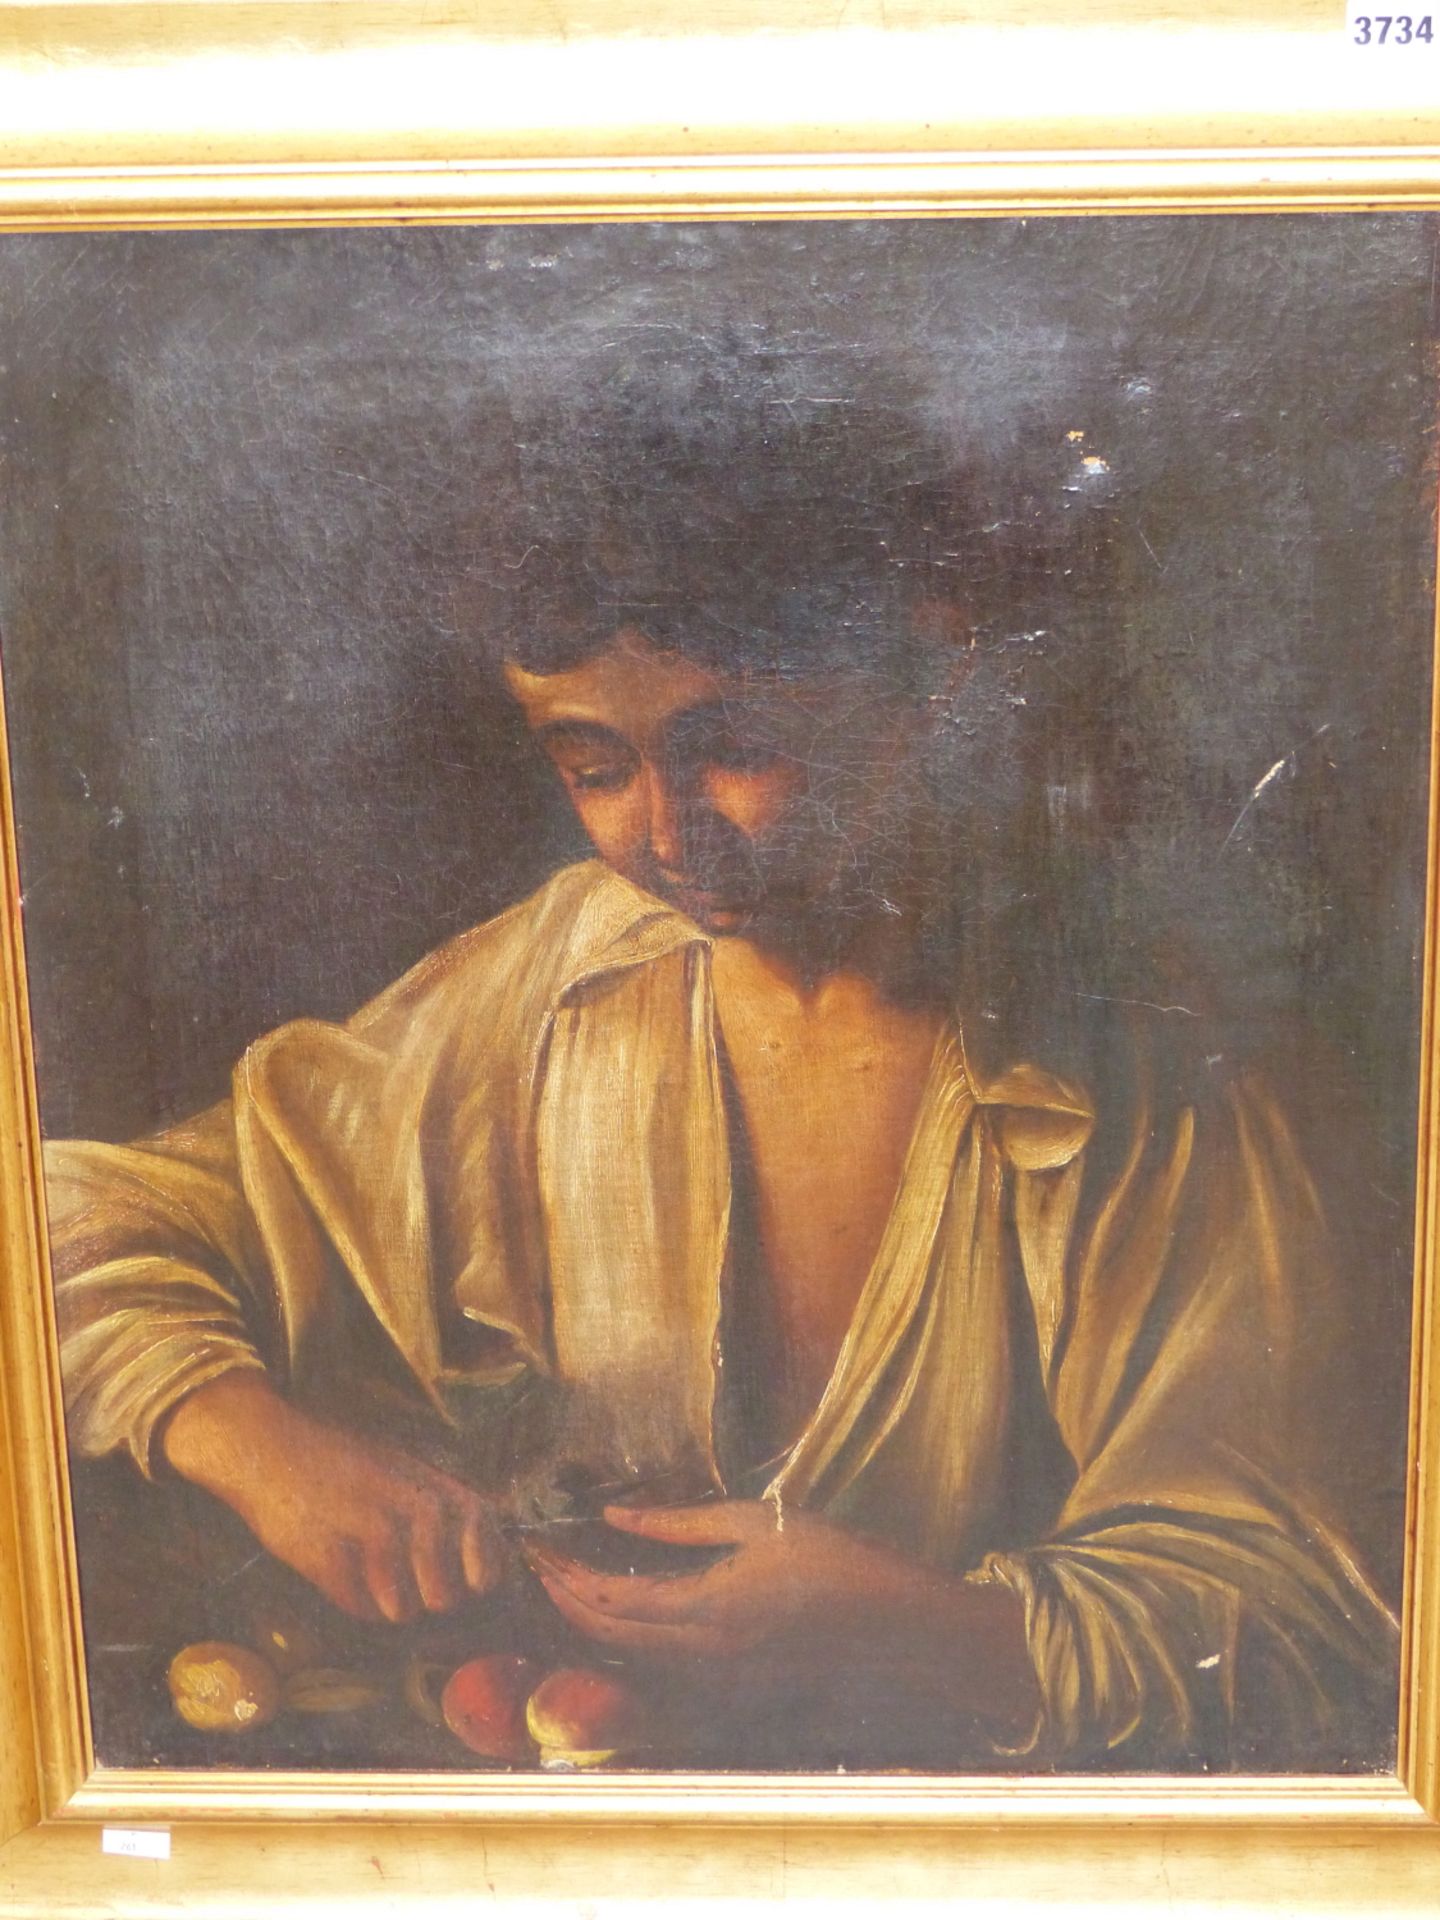 AFTER THE OLD MASTERS. (EARLY 19TH CENTURY) A YOUNG MAN PEELING APPLES. OIL ON CANVAS 50 X 60 cm. - Image 2 of 6